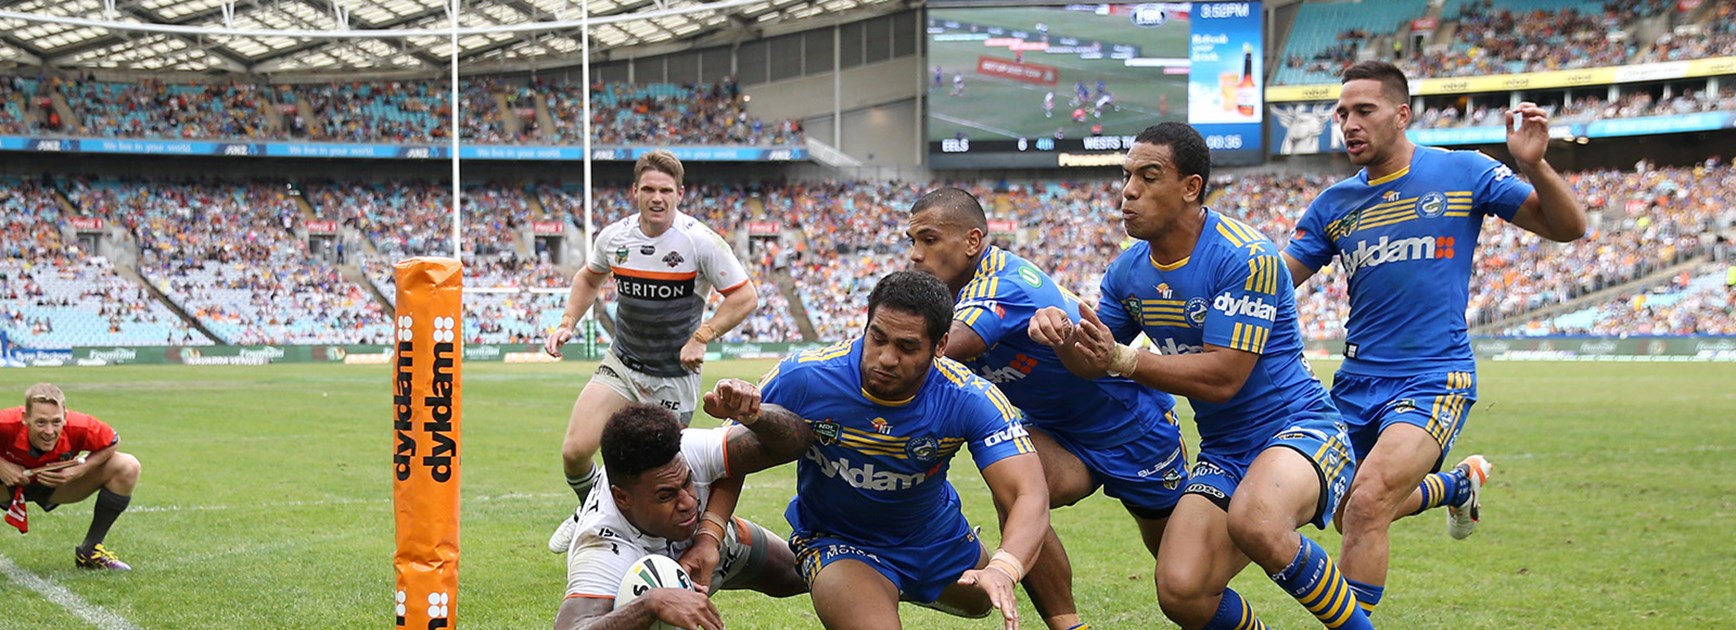 Kevin Naiqama scores in the corner despite the attention of four Eels defenders in Round 5 at ANZ Stadium.